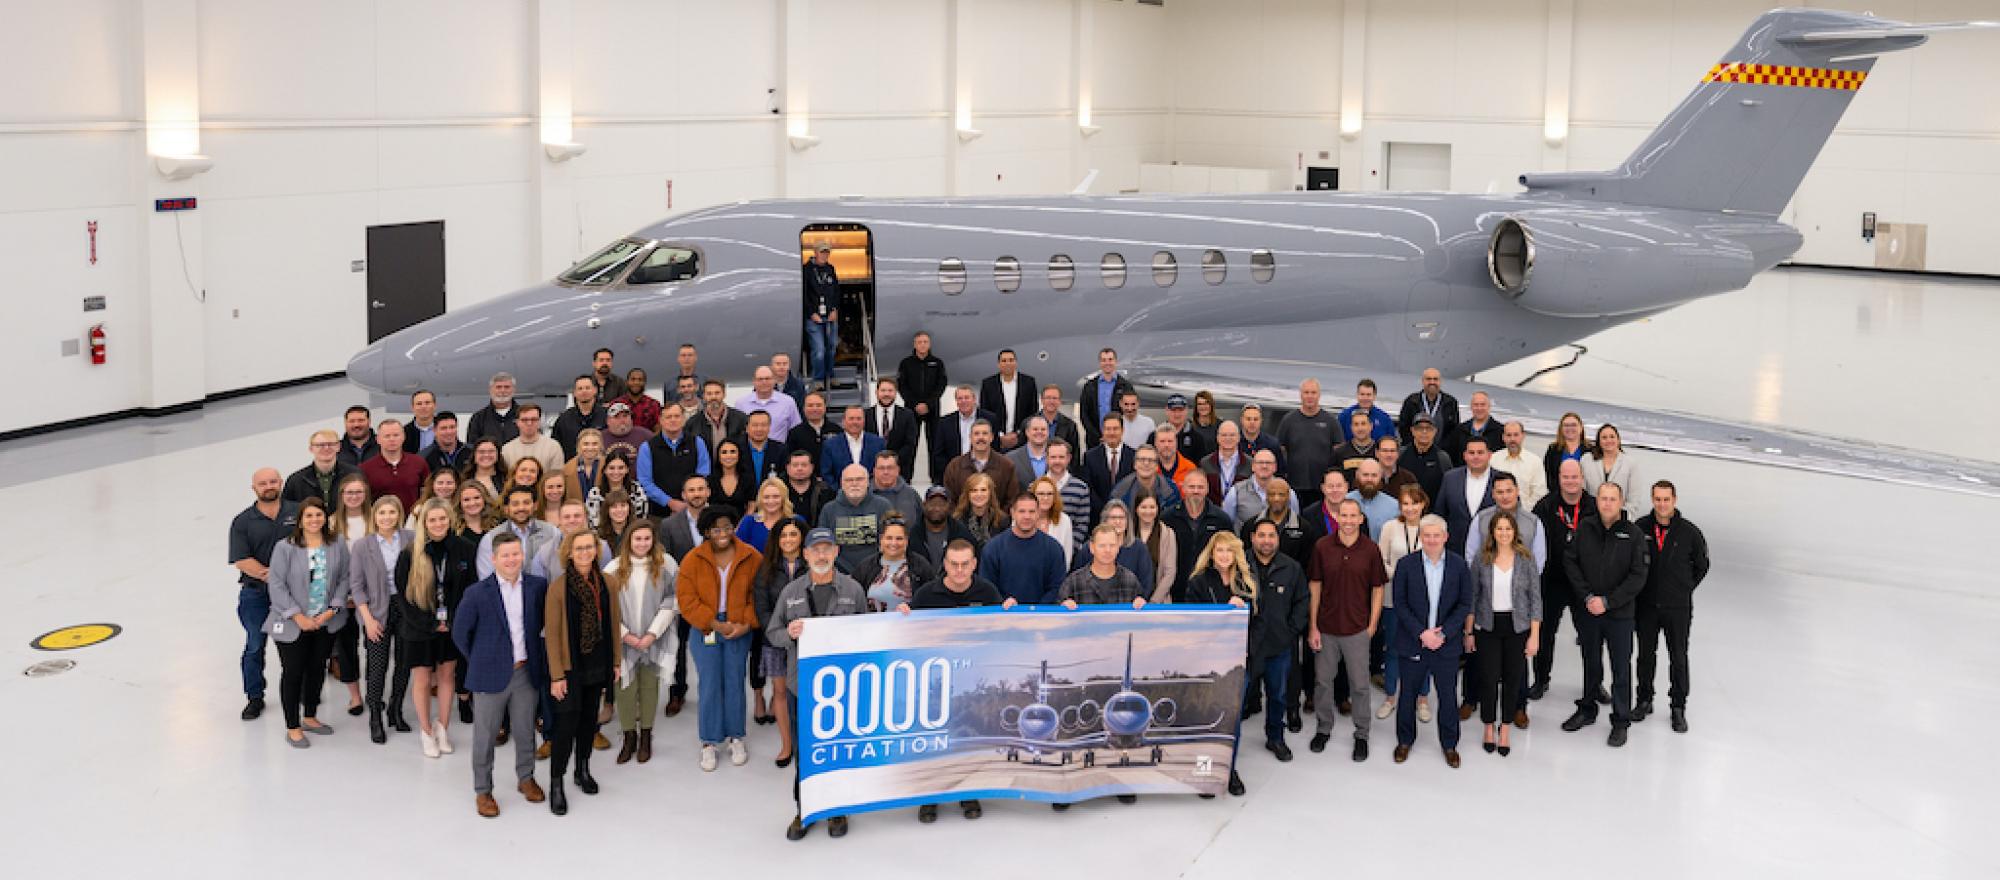 Textron Aviation employees and Scotts Miracle-Gro representatives gather in front of a Cessna Citation Longitude with banner celebrating the 8,000th Citation delivery.